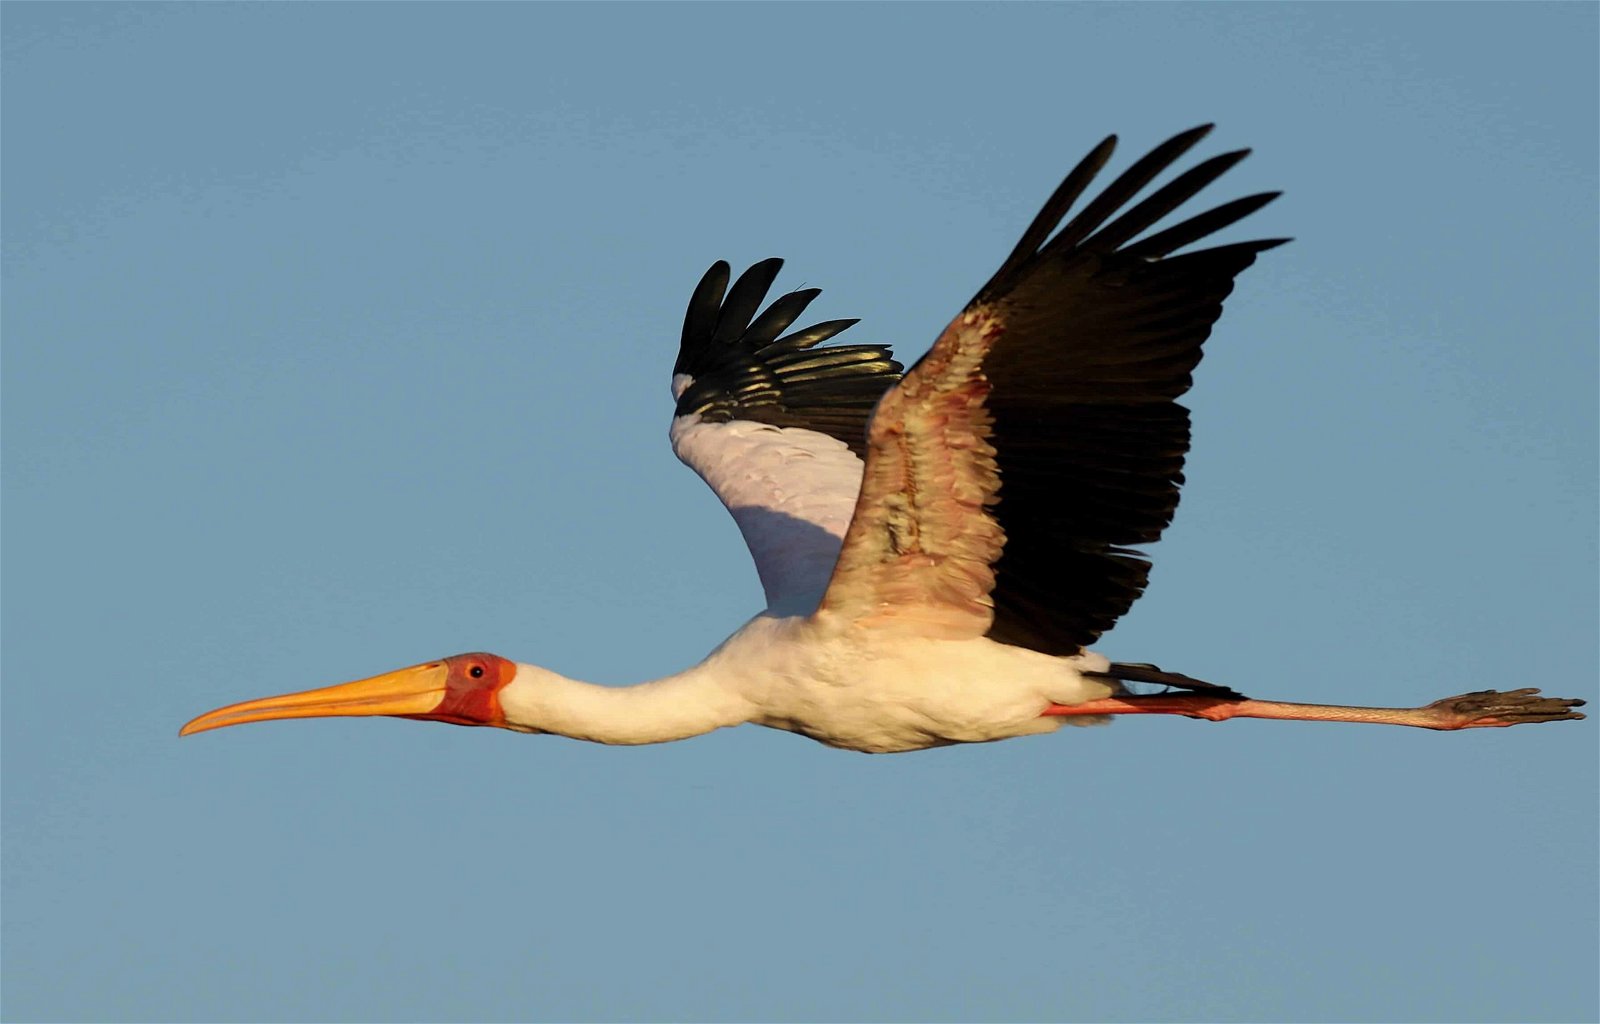 Use burst mode to capture action, like this bird in flight.